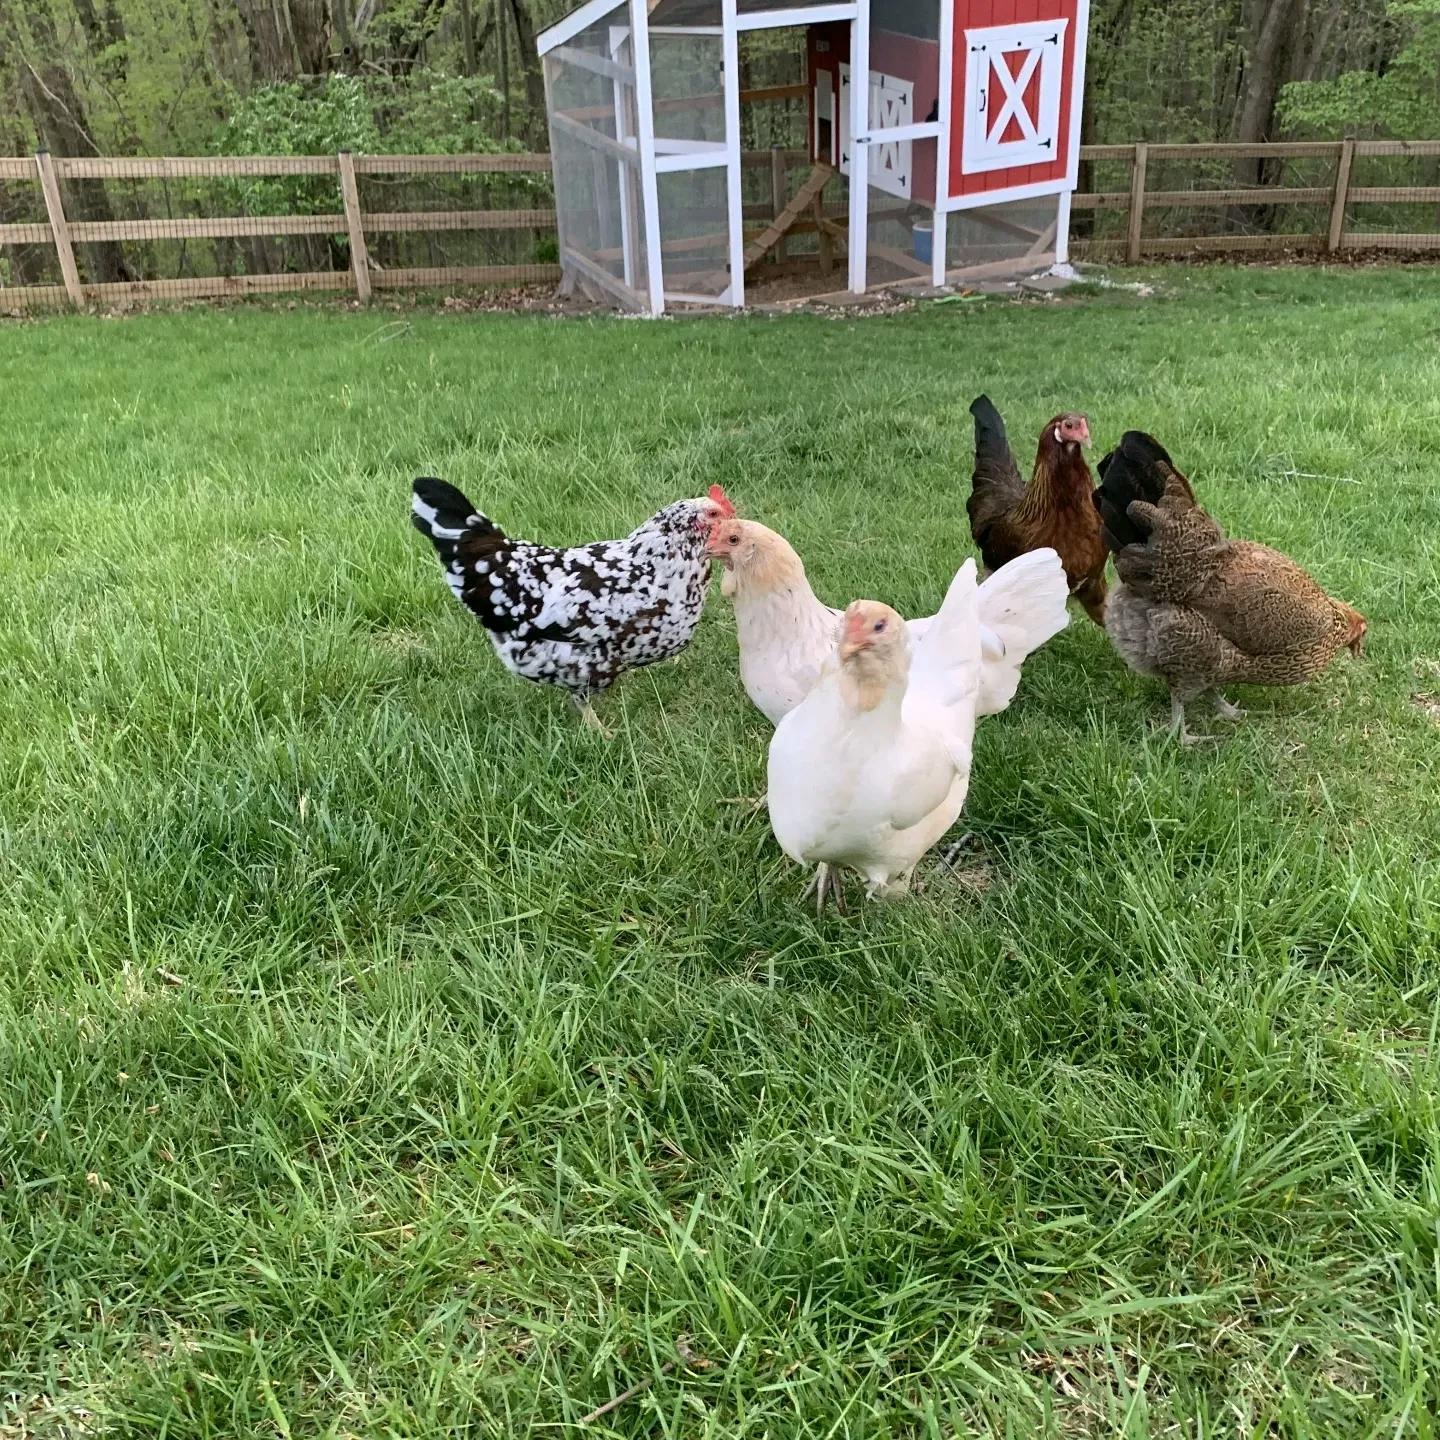 Our chickens